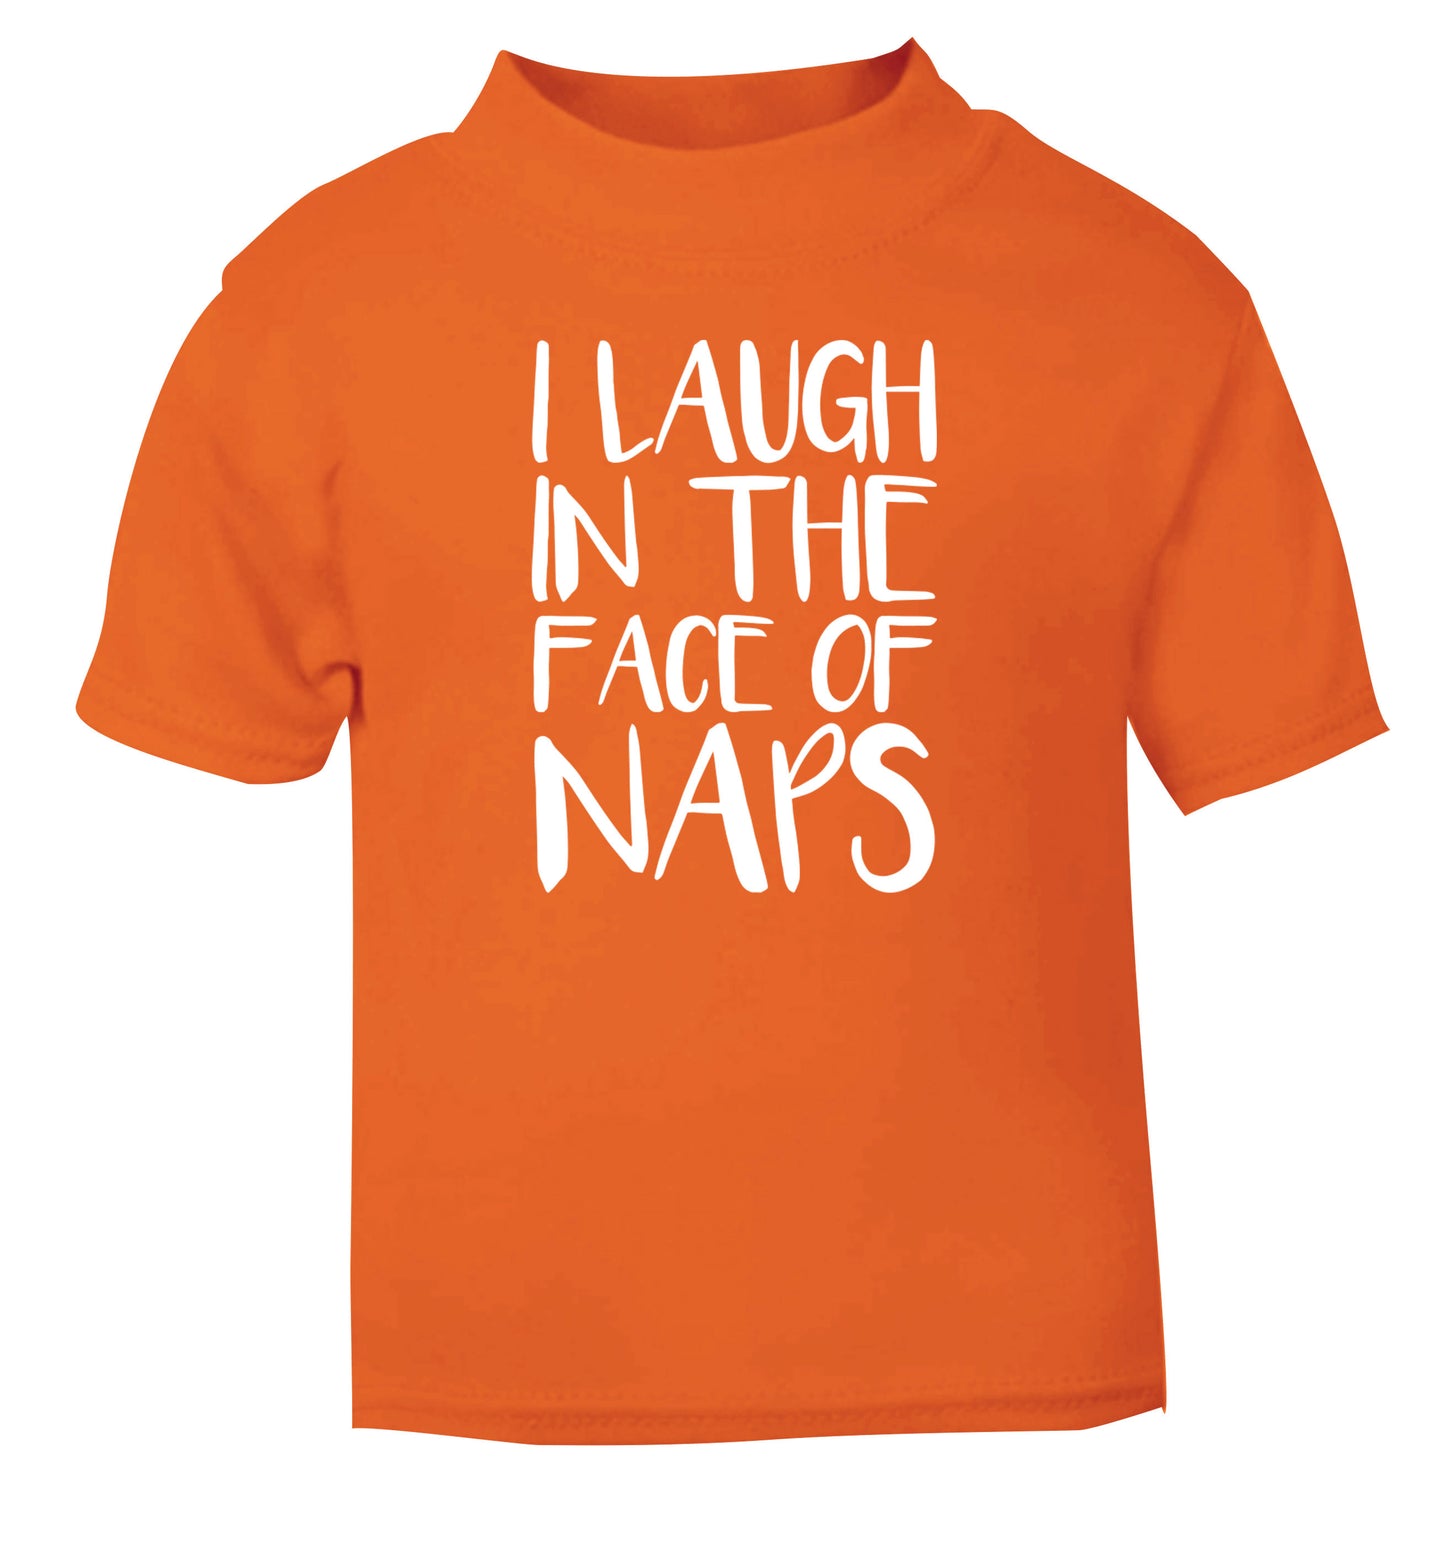 I laugh in the face of naps orange Baby Toddler Tshirt 2 Years